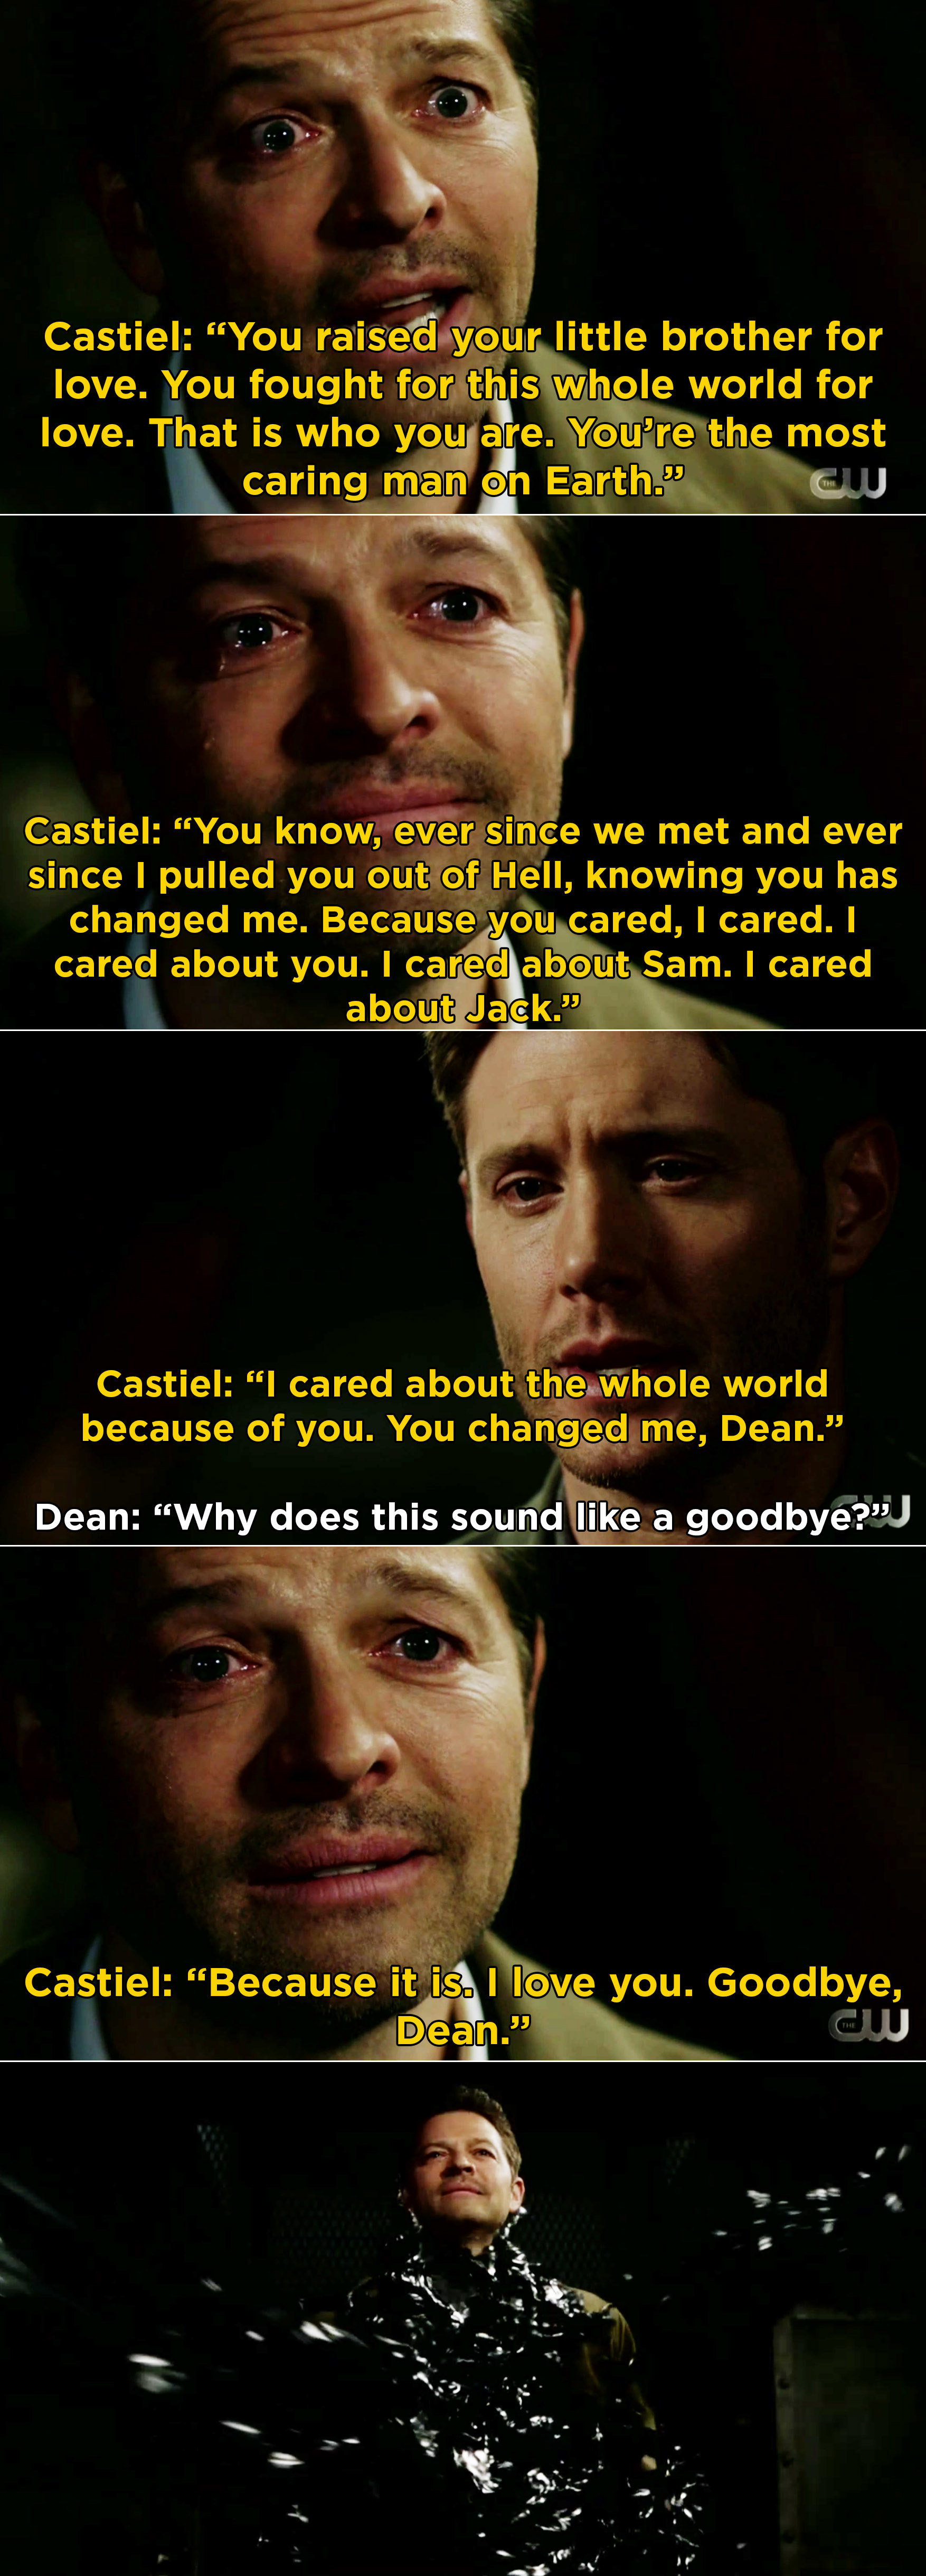 Dean and Castiel goodbye scene: &quot;You&#x27;re the most caring man on earth, I cared about the whole world because of you, you changed me Dean,&quot; &quot;Why does this sound like a goodbye?&quot; &quot;Because it is, I love you, goodbye Dean&quot;